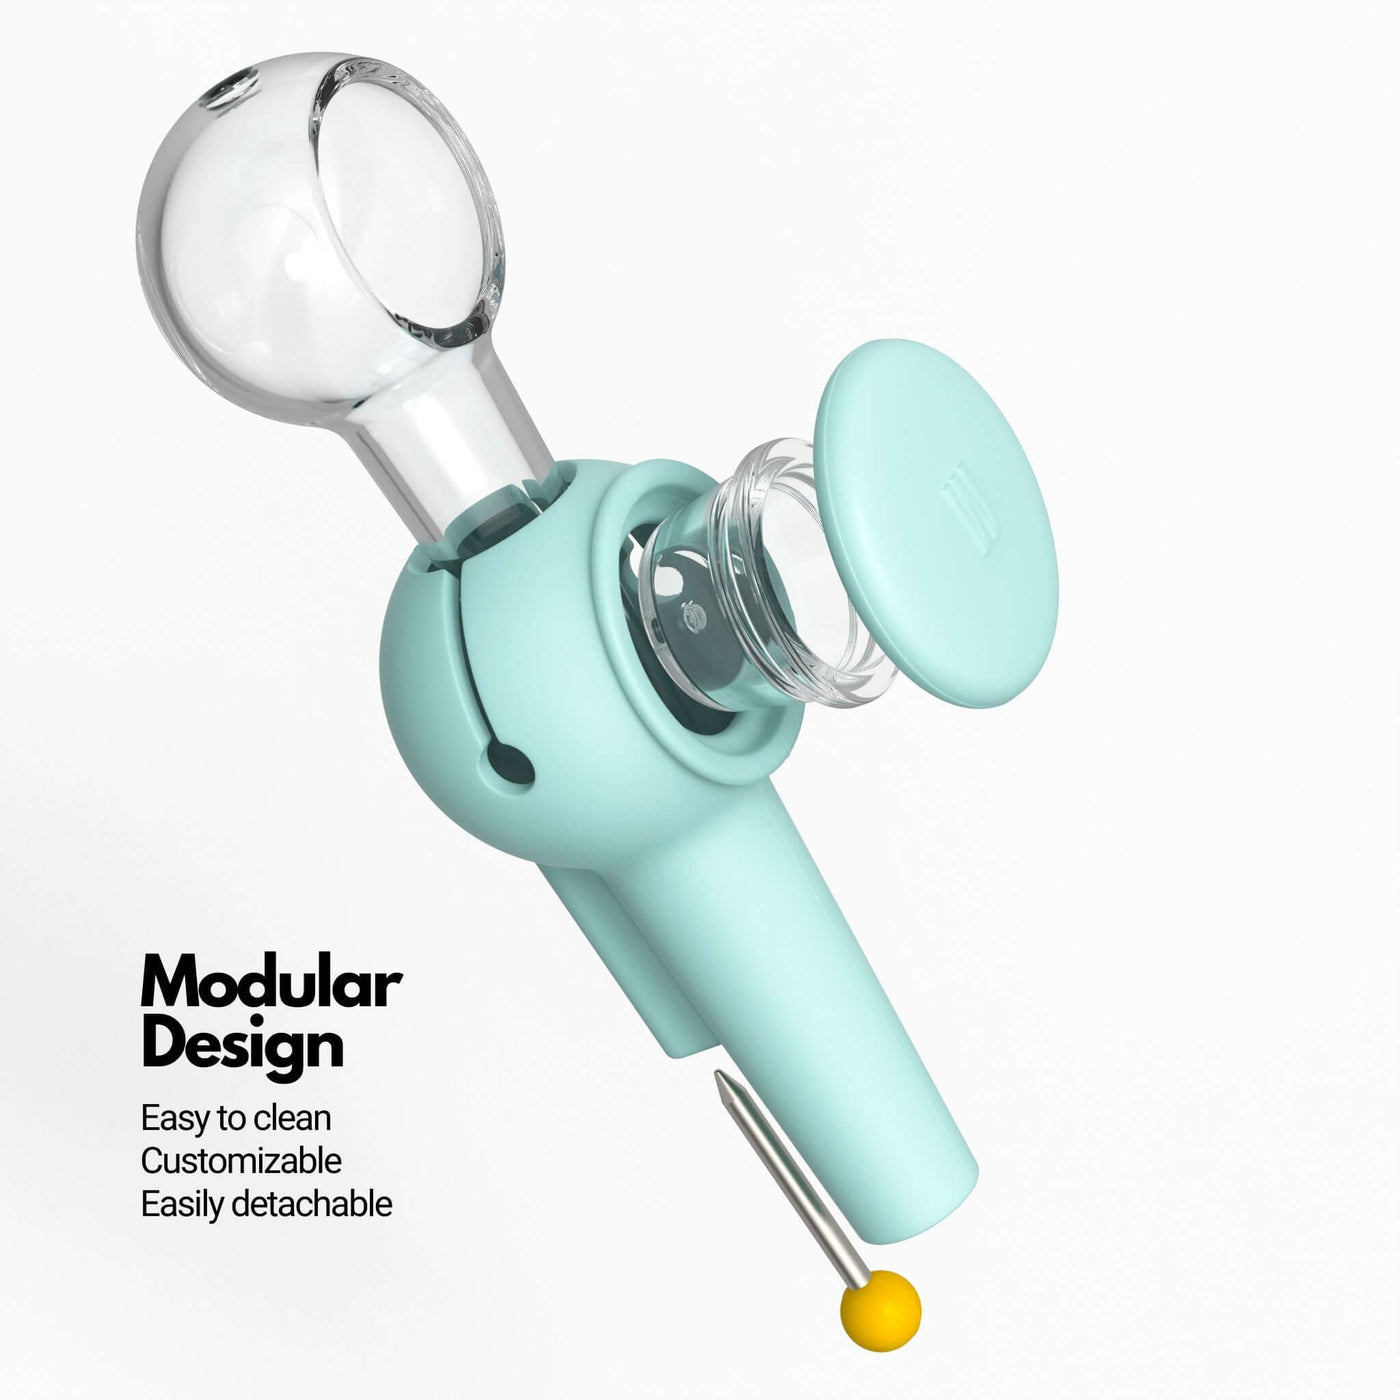 Exploded view infographic of Weeday spoon pipe (in sky blue color), highlighting its customizable and detachable features.